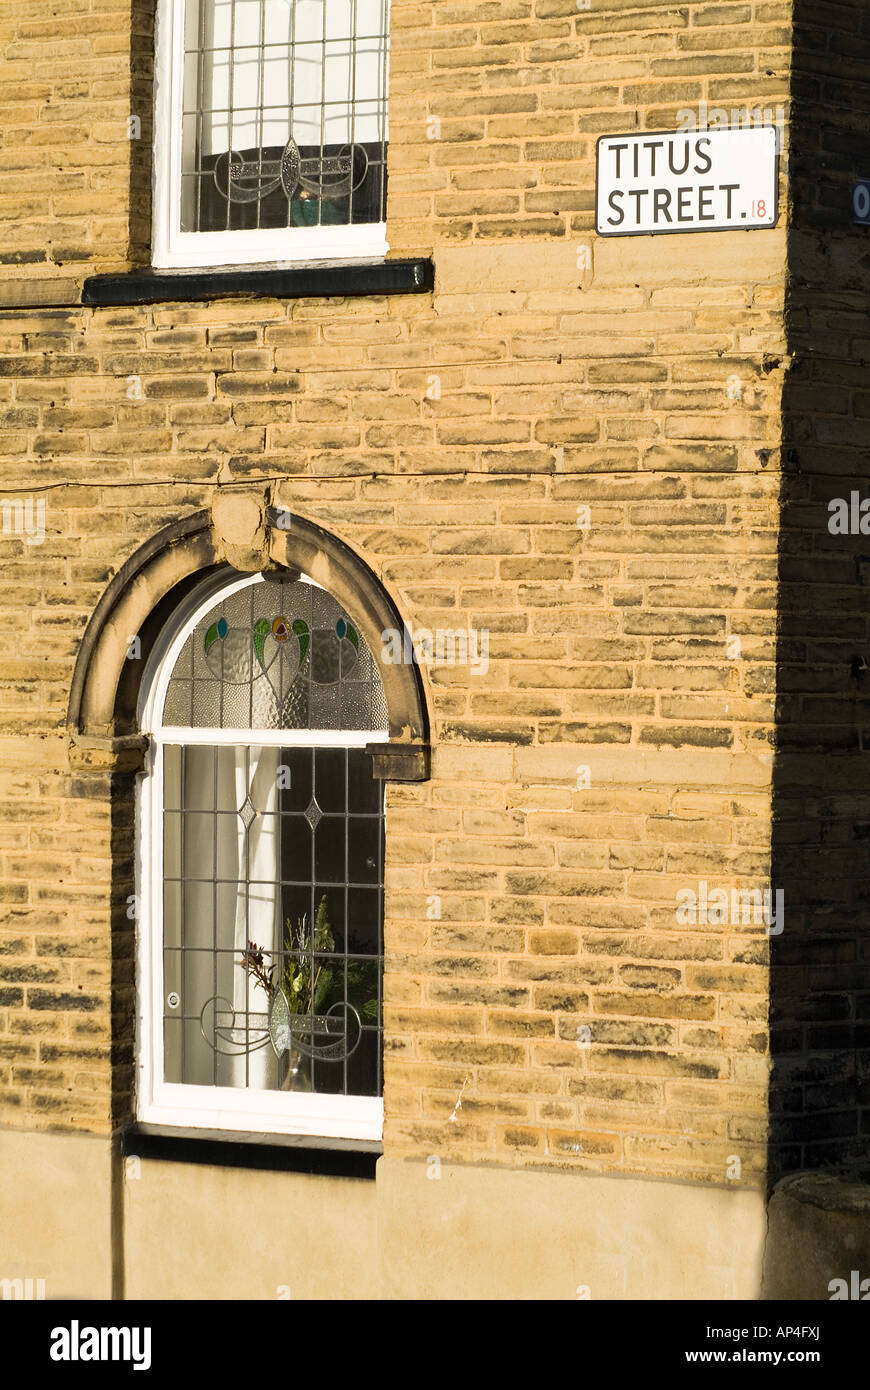 dh  SALTAIRE WEST YORKSHIRE Titus street sign in Titus Salt Victorian village exterior house Stock Photo